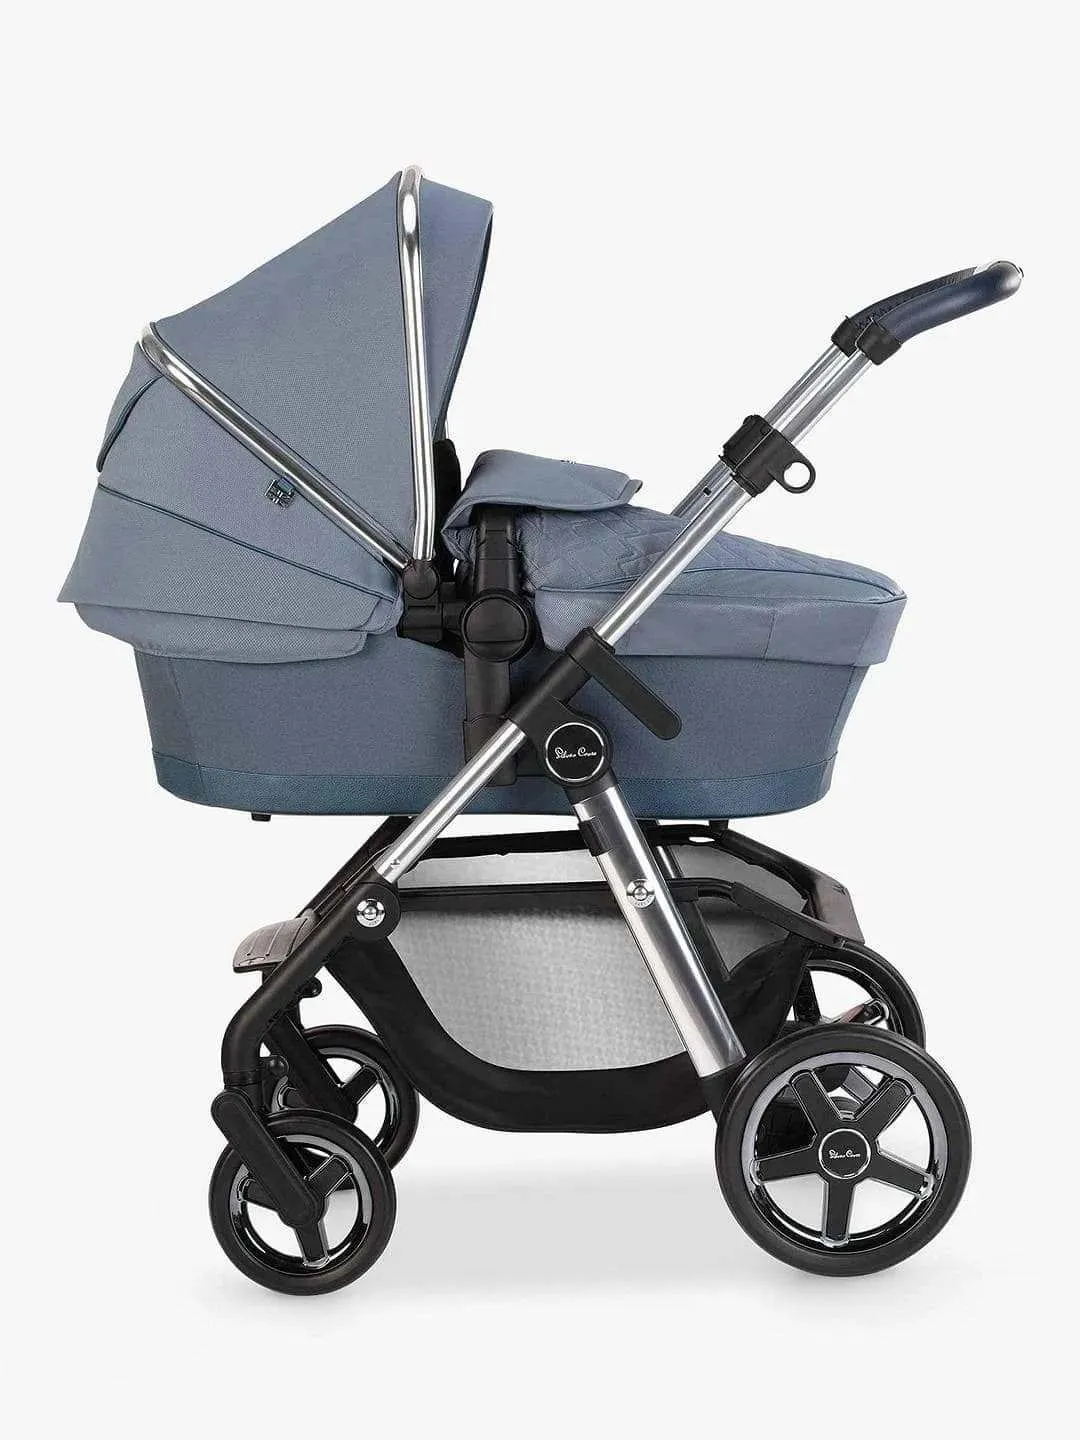 Glamourous new design  with pacific autograph pushchair.